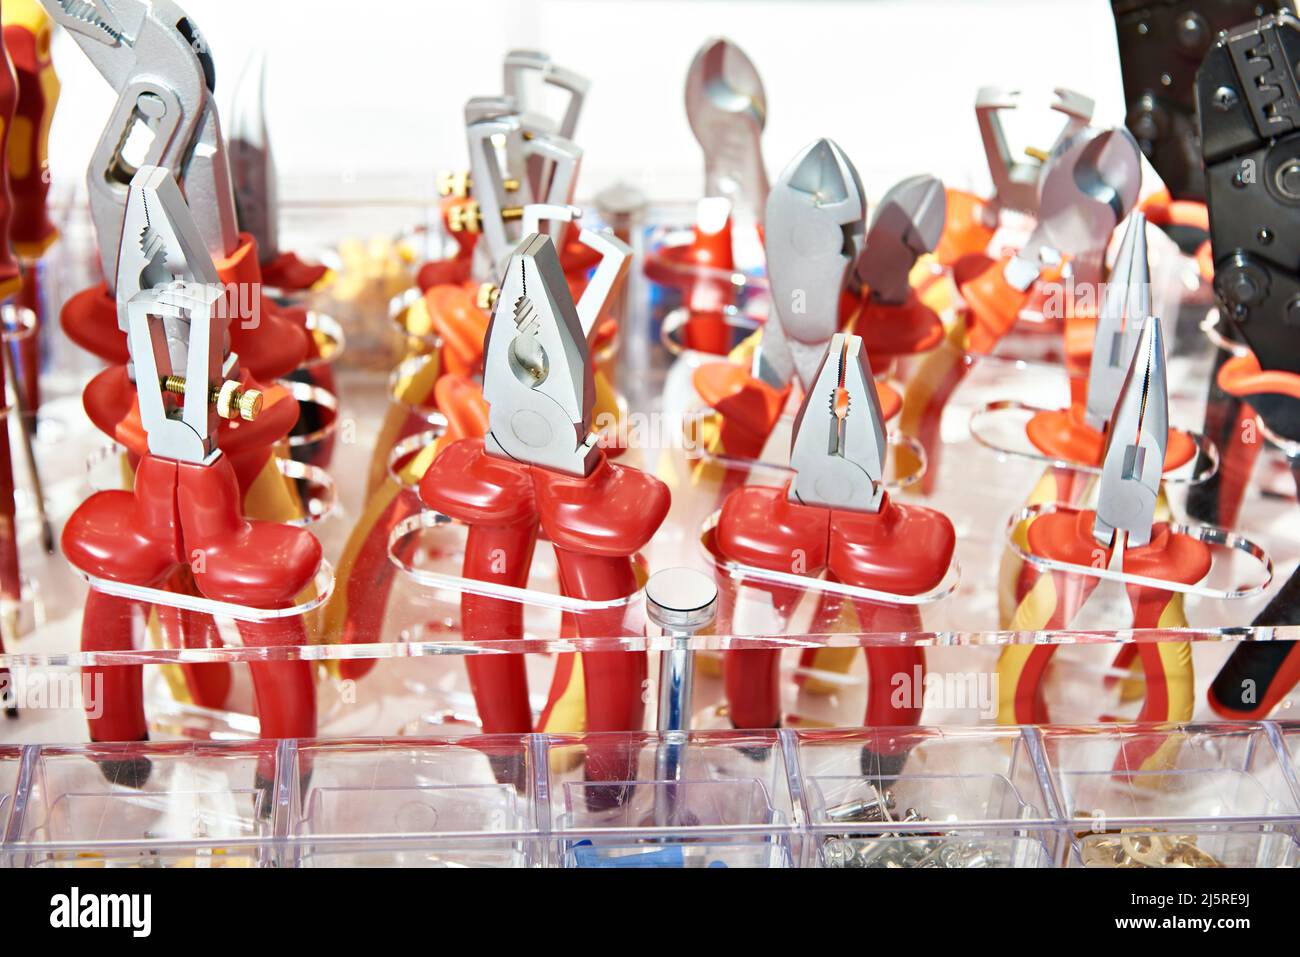 Red pliers in hardware store Stock Photo